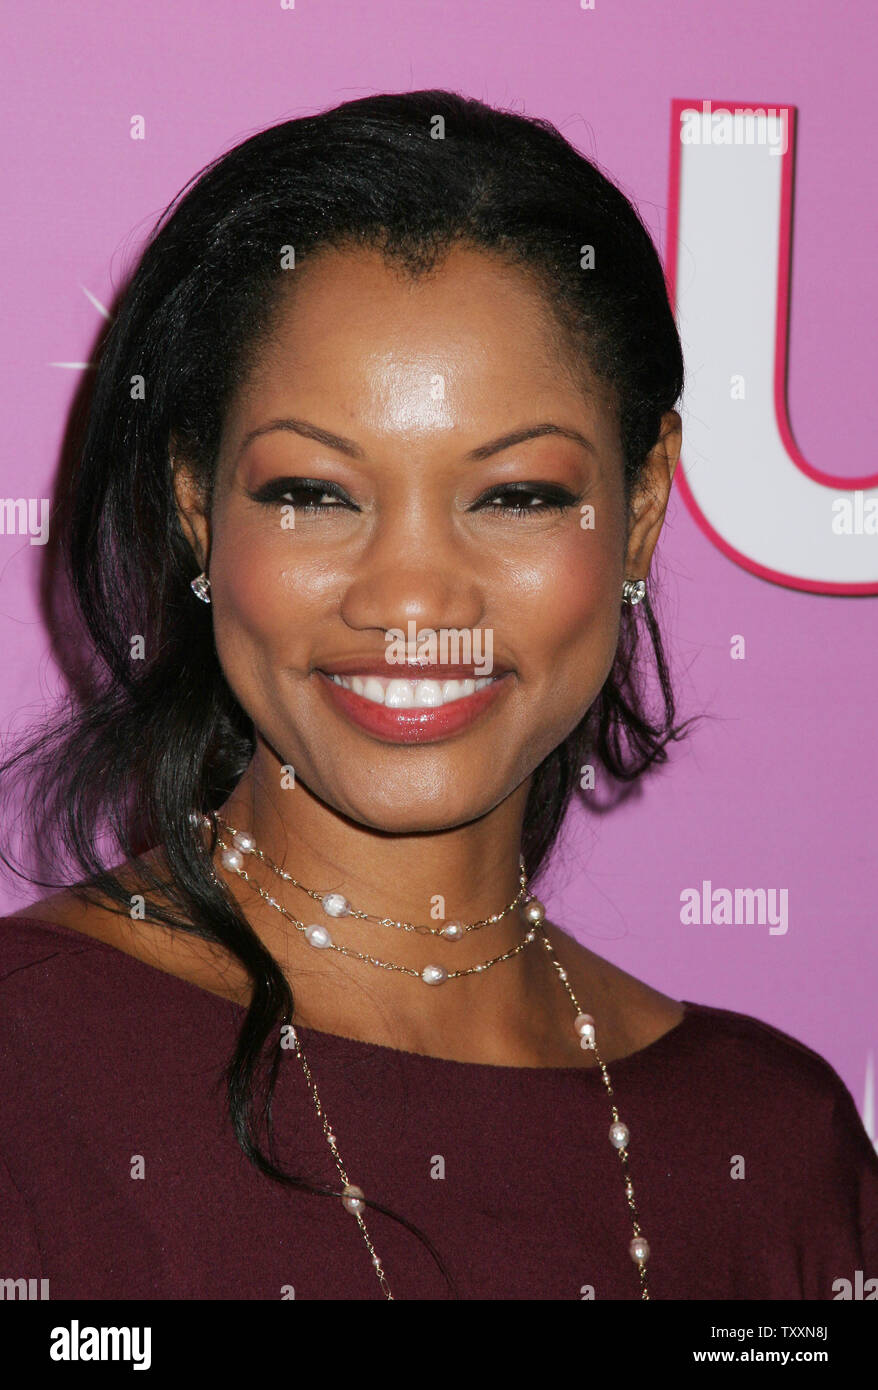 Actress Garcelle Beauvais poses for photographers at the Us Weekly Hot Young Hollywood Party at the Spider Club in Los Angeles, Sept. 17, 2004. (UPI Photo/Francis Specker) Stock Photo